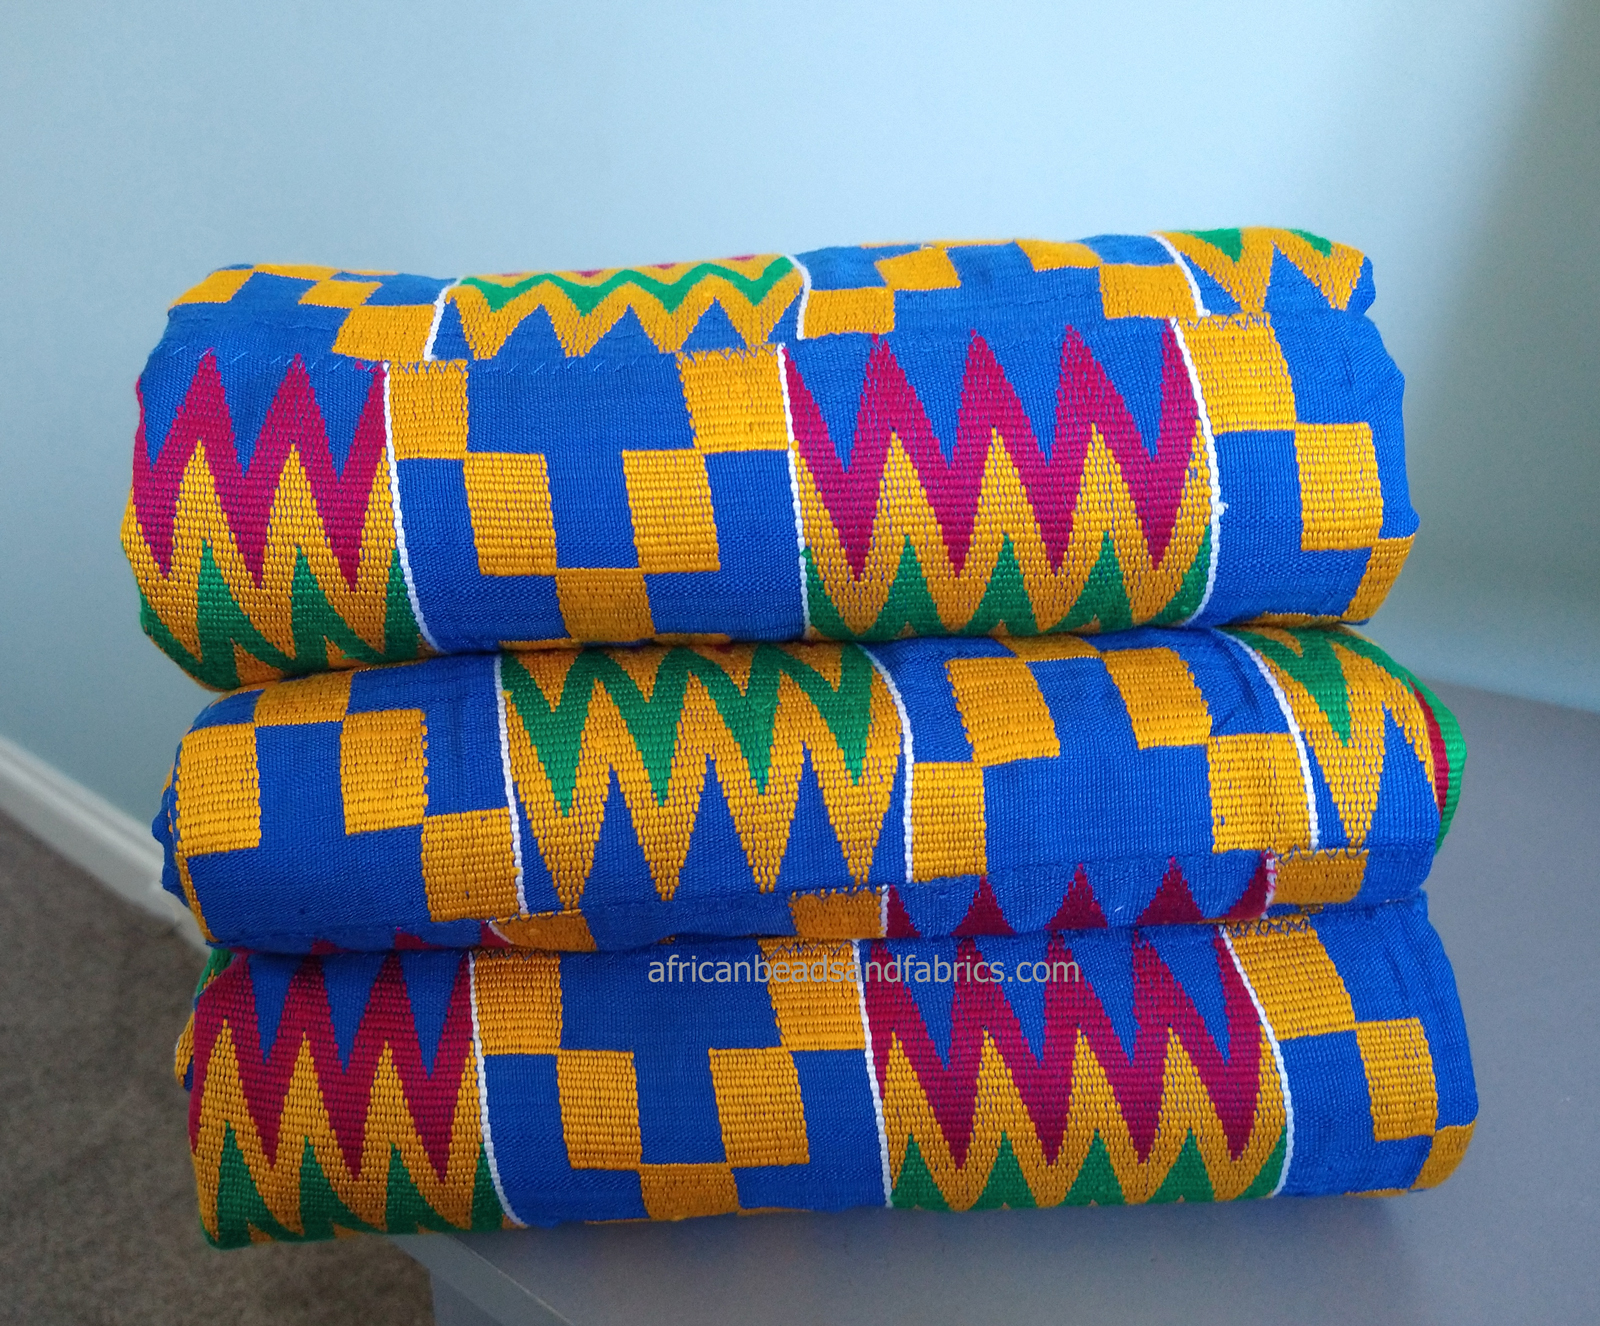 Handwoven Kente Cloth from Ghana/ African Fabric/ Handcrafted African ...